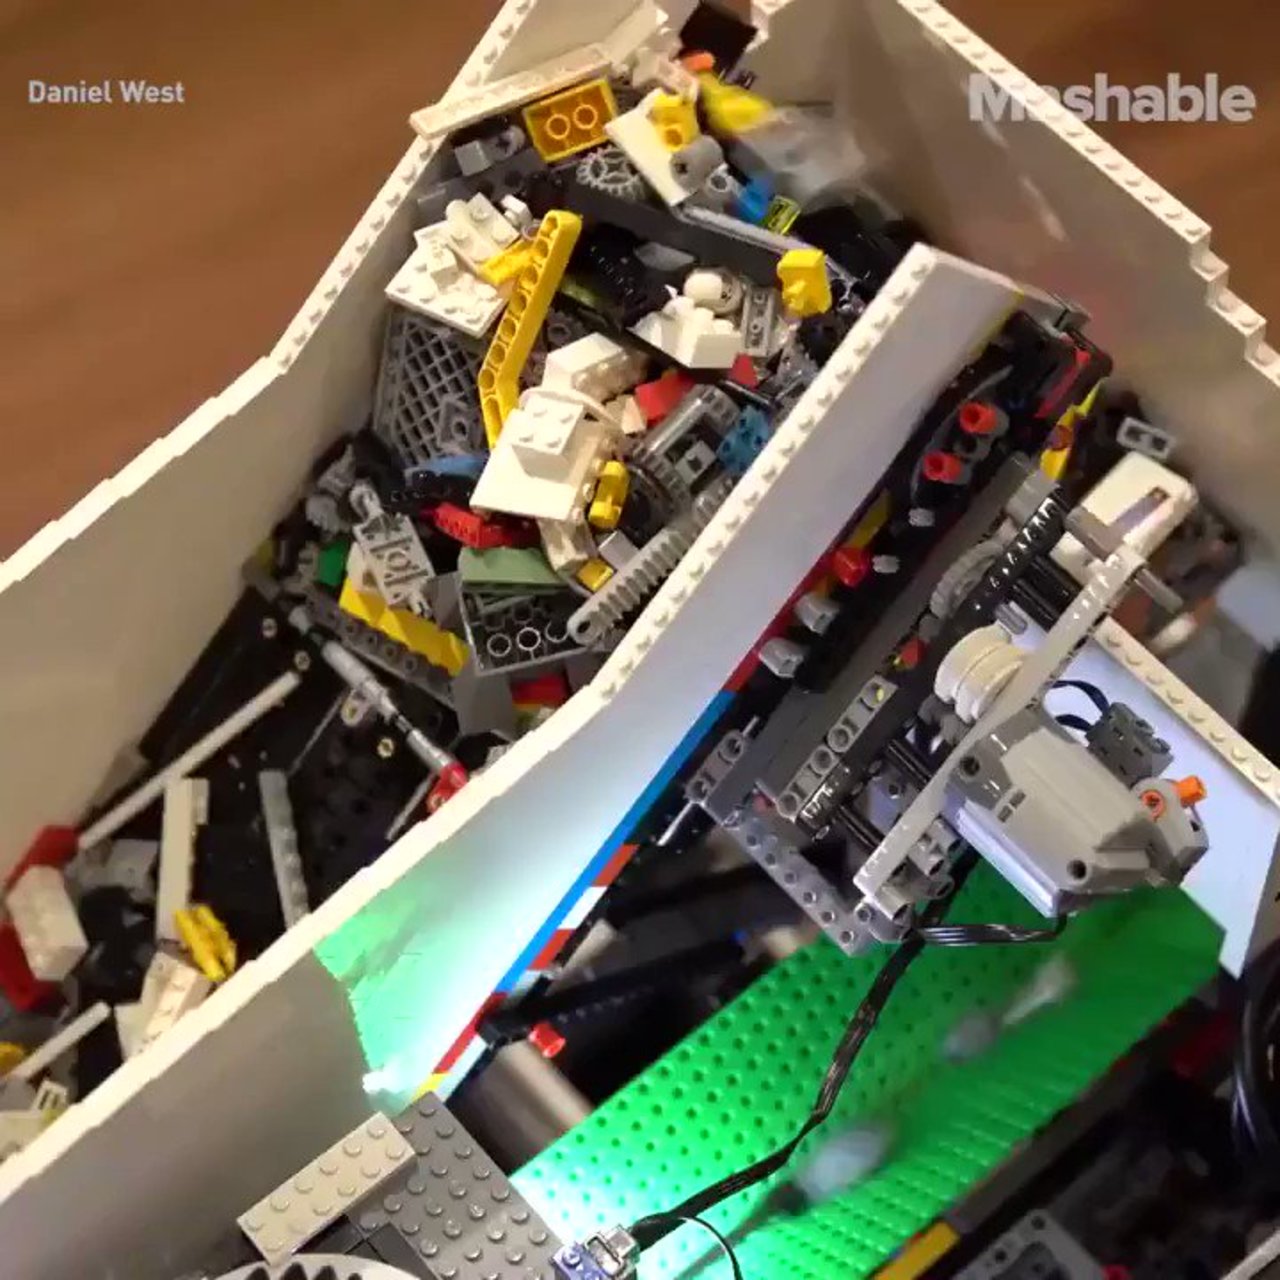 This #AI powered machine will make cleaning up your Legos infinitely much easier by @mashable #ArtificialIntelligence #Innovation #ML Cc: @sebbourguignon @ronald_vanloon @pascal_bornet https://t.co/ItyTWyUk8V